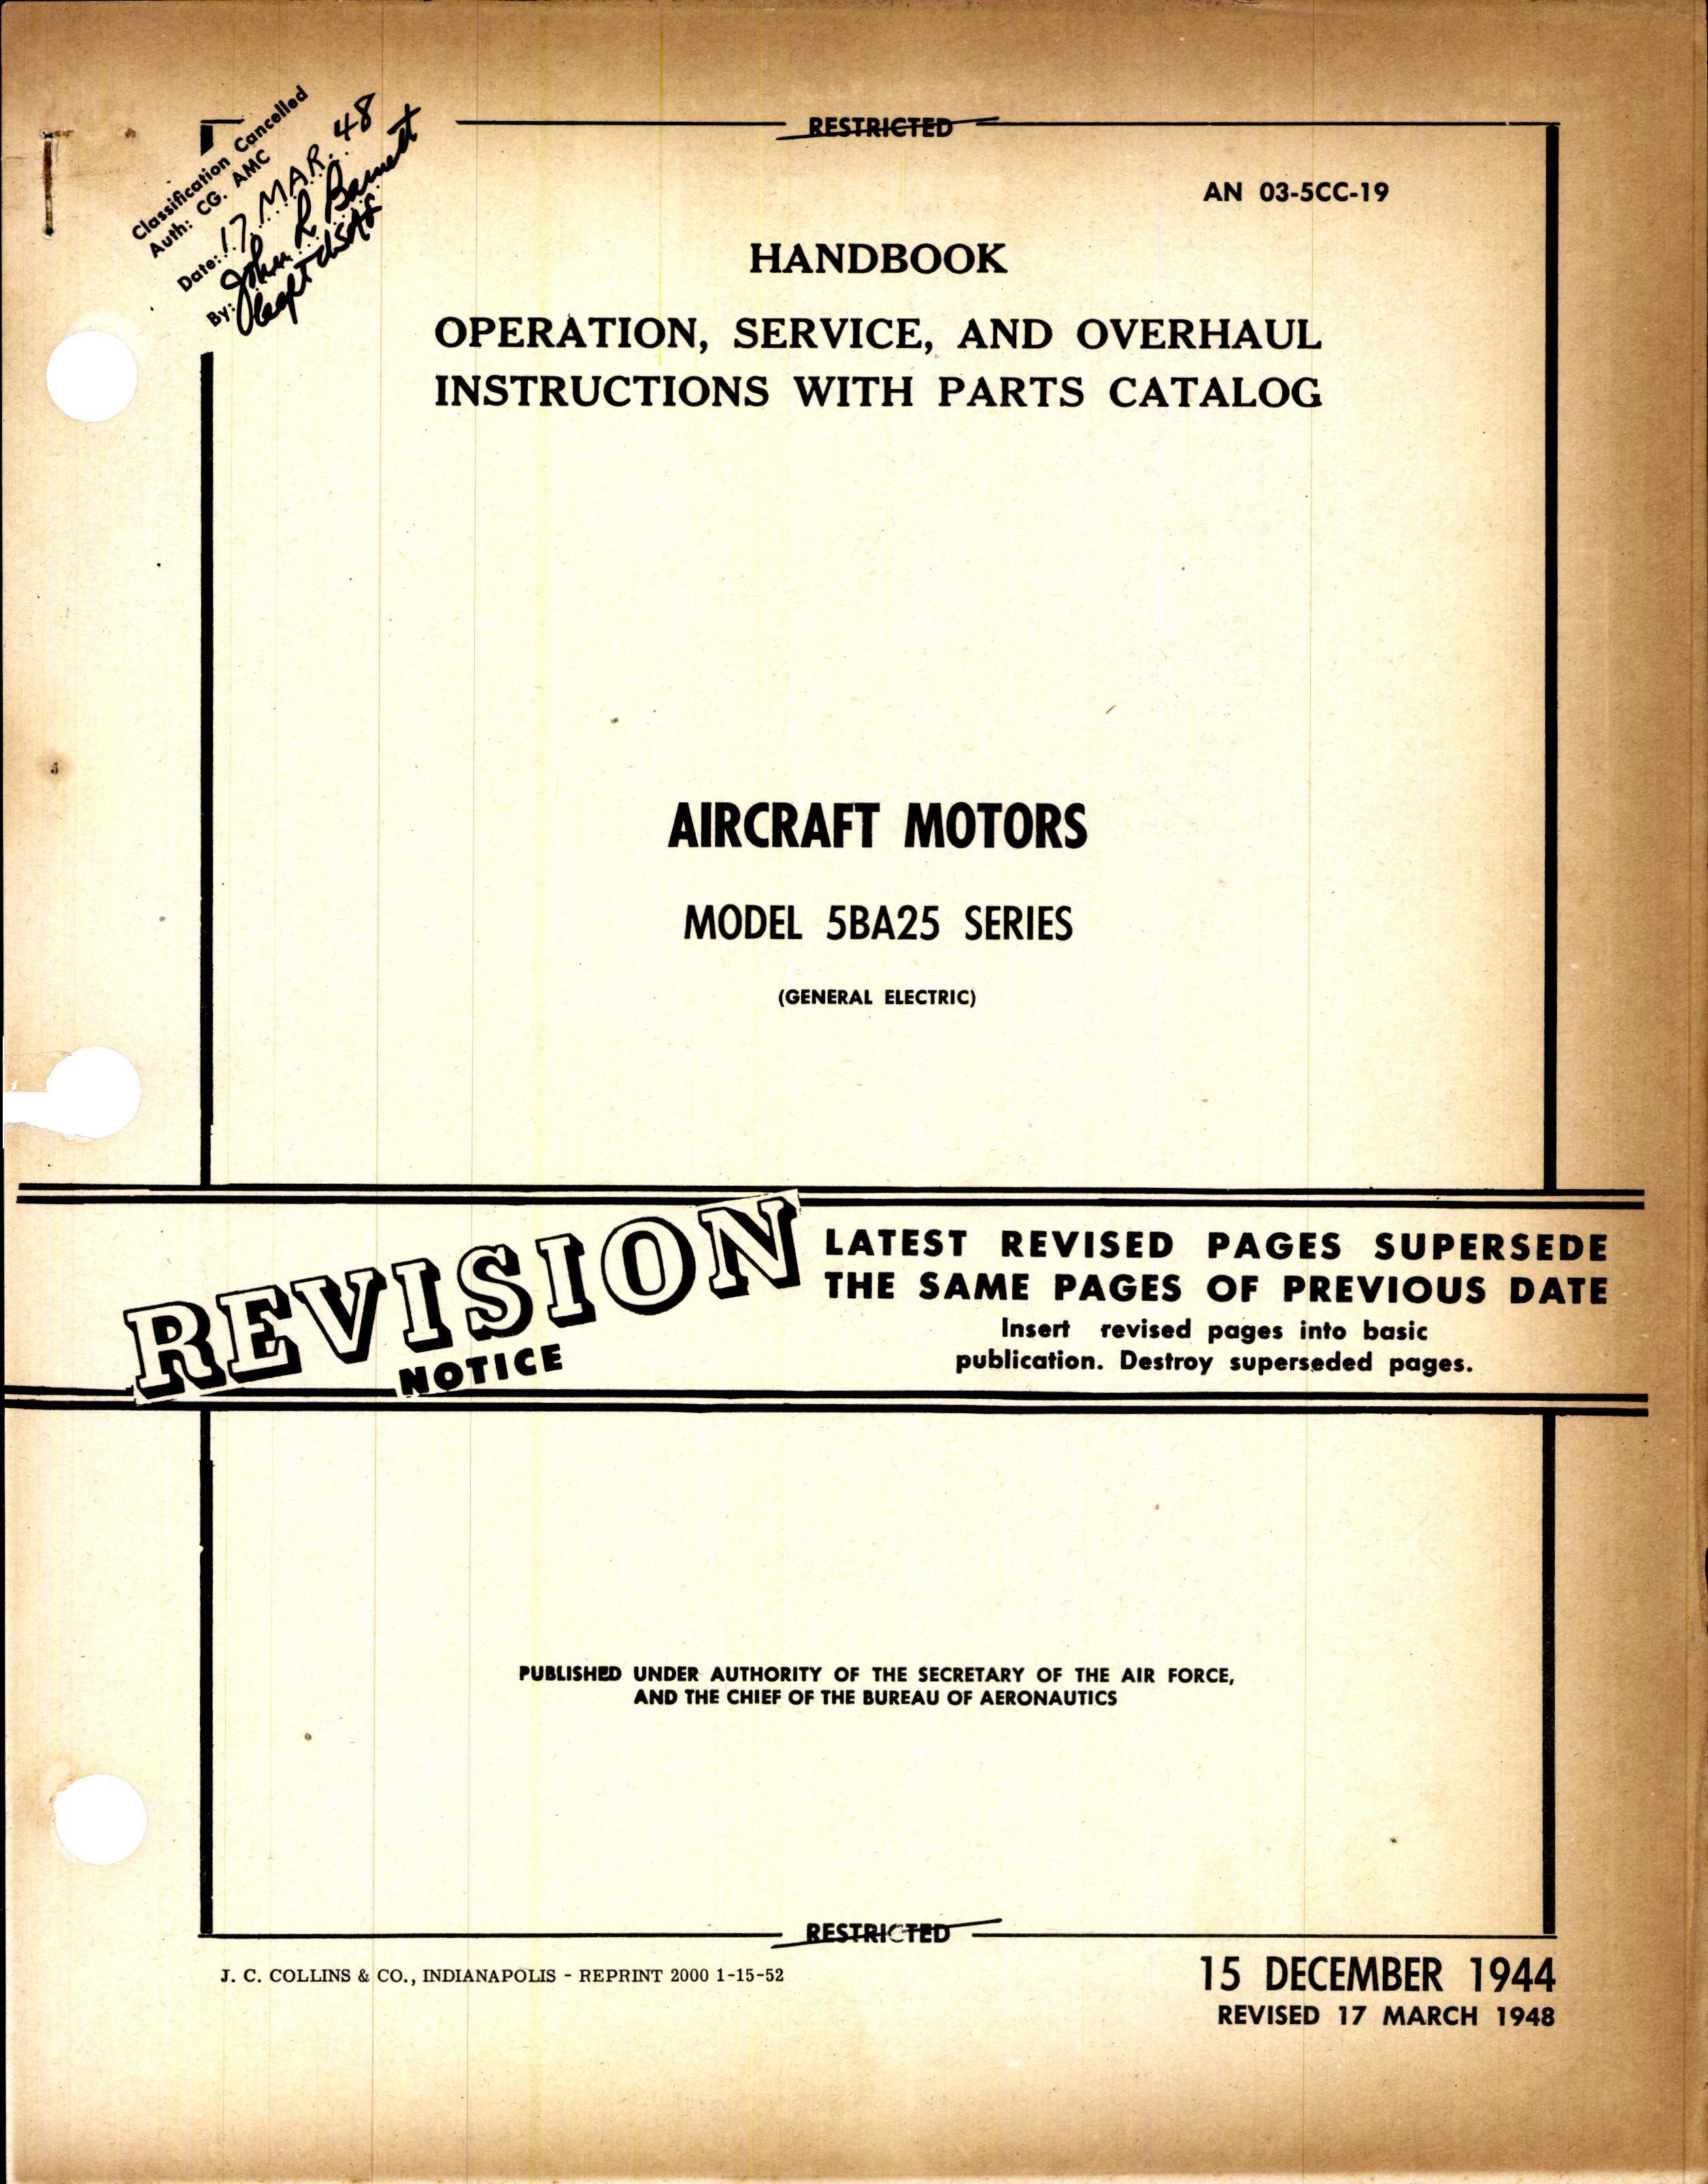 Sample page 1 from AirCorps Library document: Operation, Service, & Overhaul Instructions w/ Parts Catalog for Aircraft Motors Model 5BA25 Series